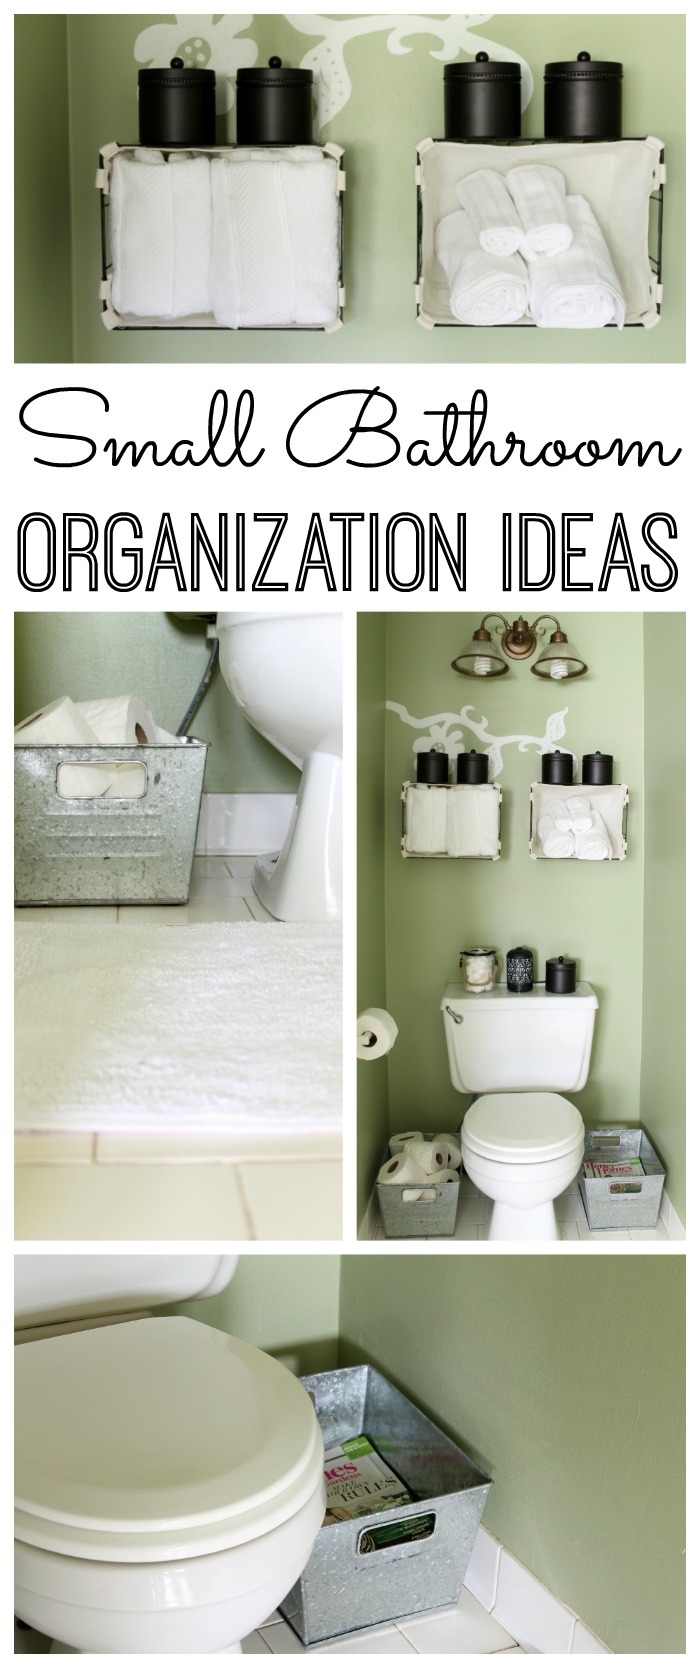 https://www.thecountrychiccottage.net/wp-content/uploads/2016/07/small-bathroom-organization-ideas-collage.jpg